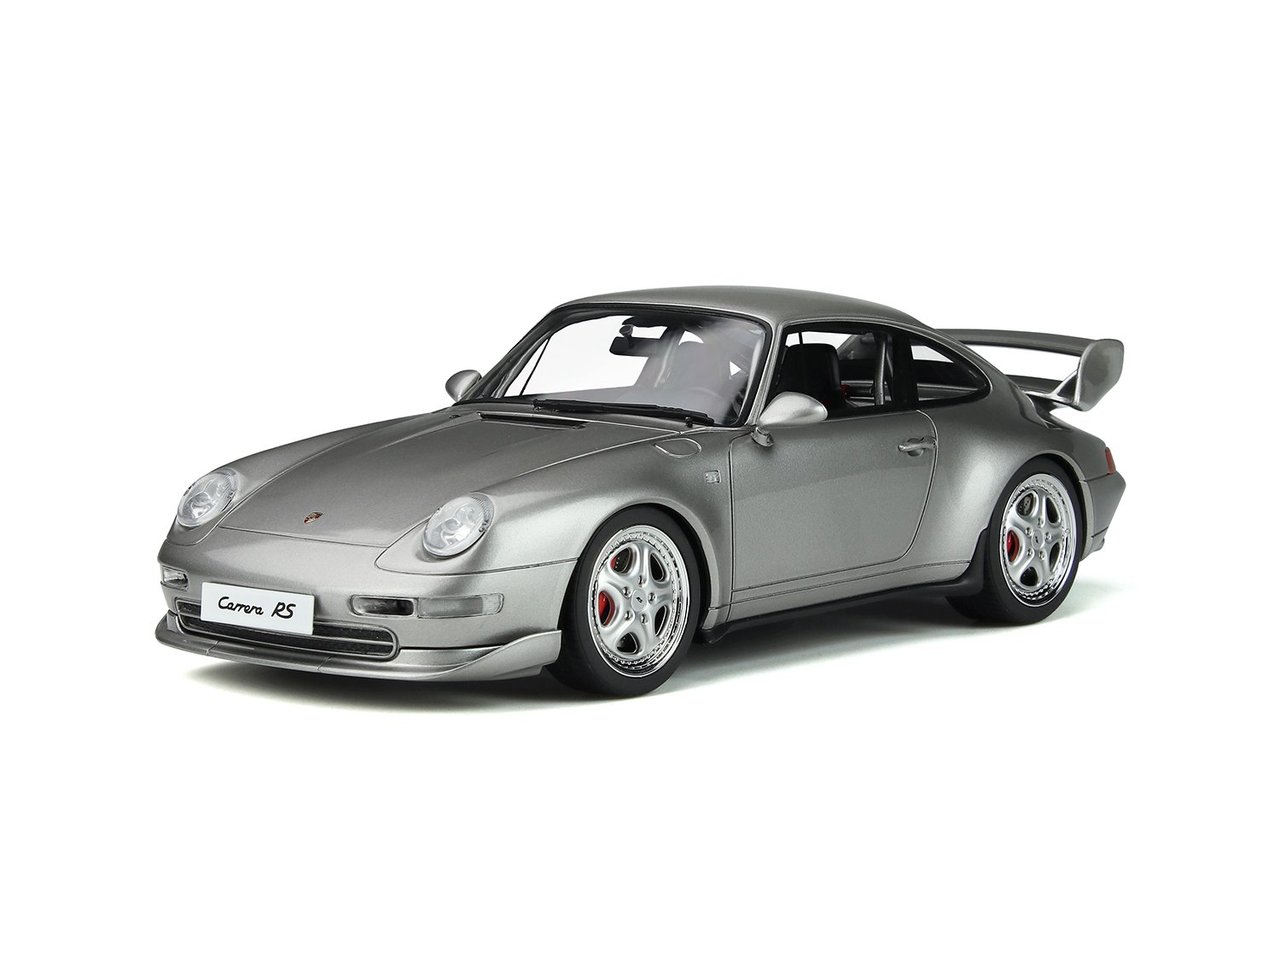 Porsche 911 Carrera Rs Club Sport Arctic Silver Limited Edition To 999 Pieces Worldwide 1/18 Model Car By Gt Spirit